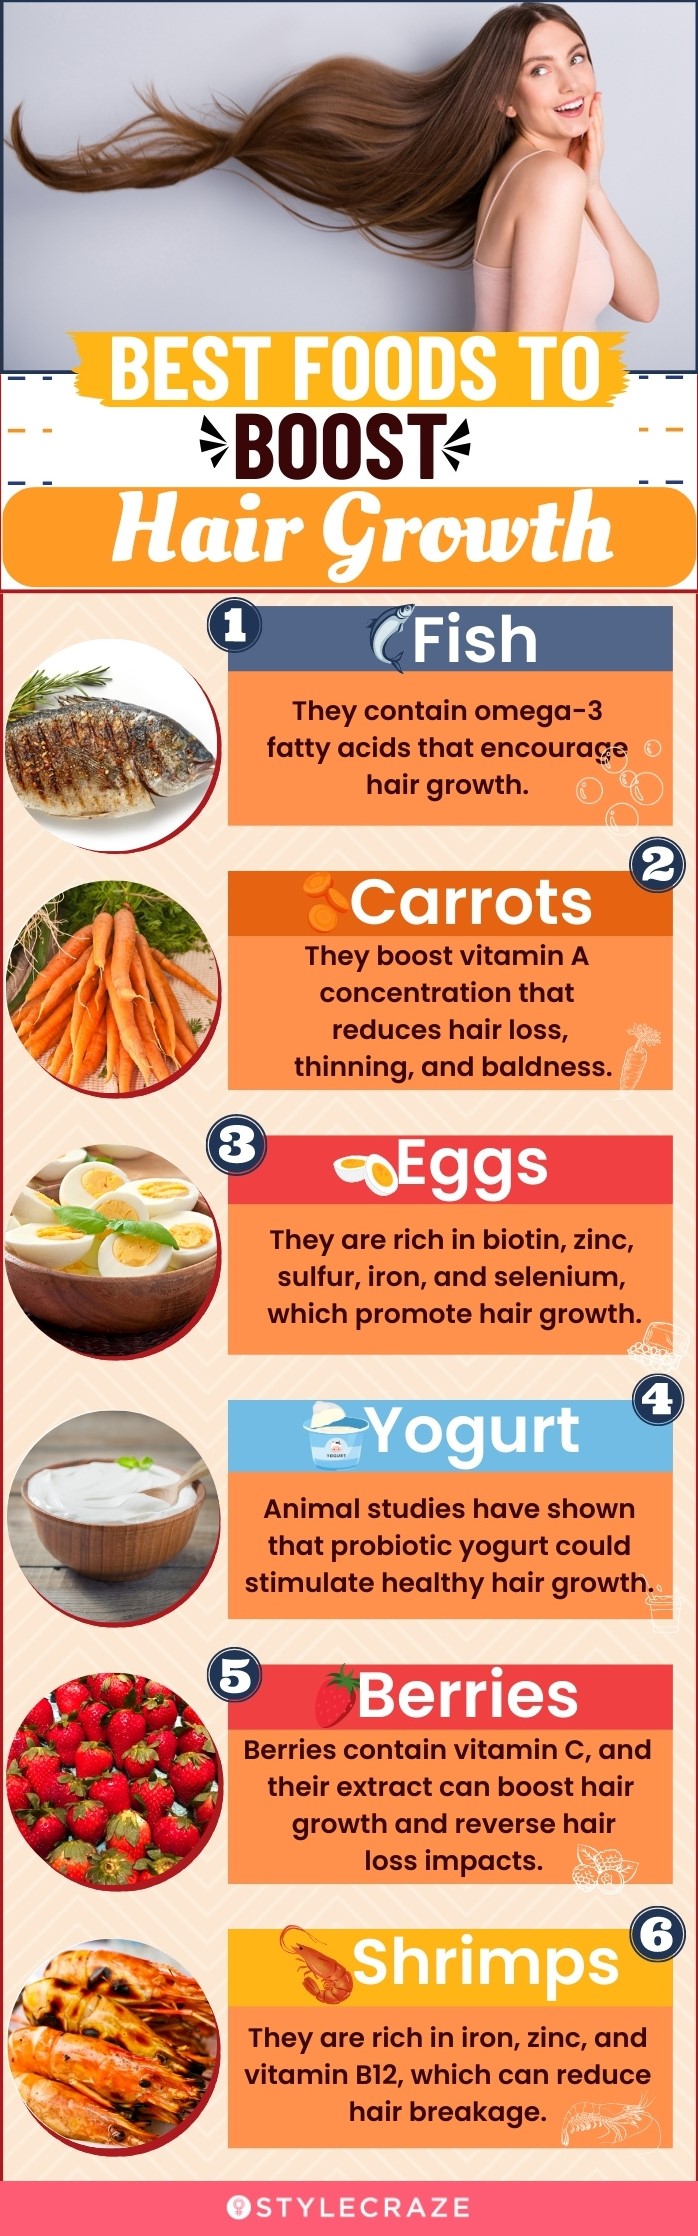 Effective Diet for Hair Loss Explained at Life Force I Avoid Hair Fall